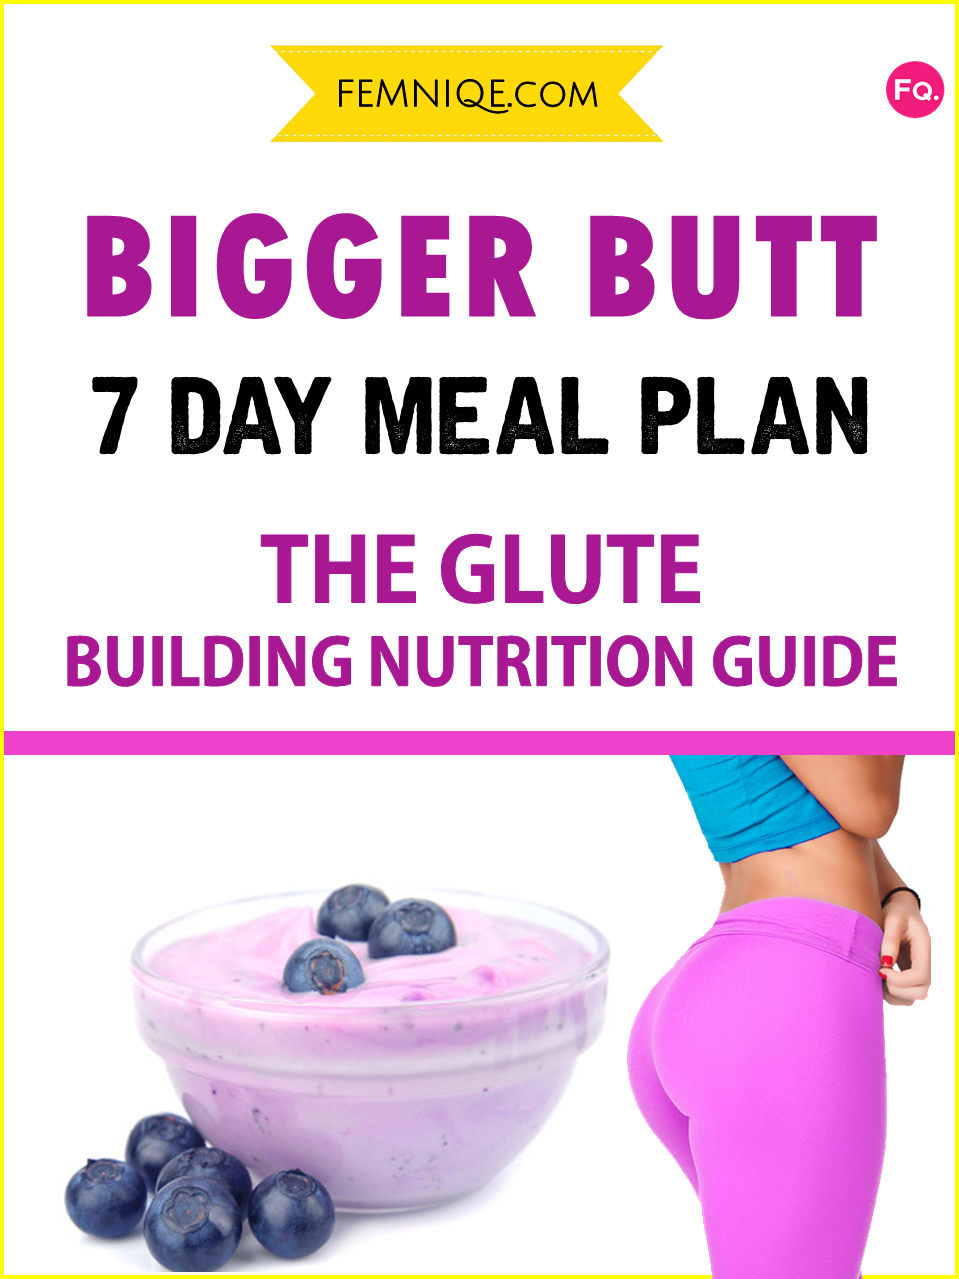 7 Day Bigger Butt Meal Plan (Complete Nutrition Guide ...